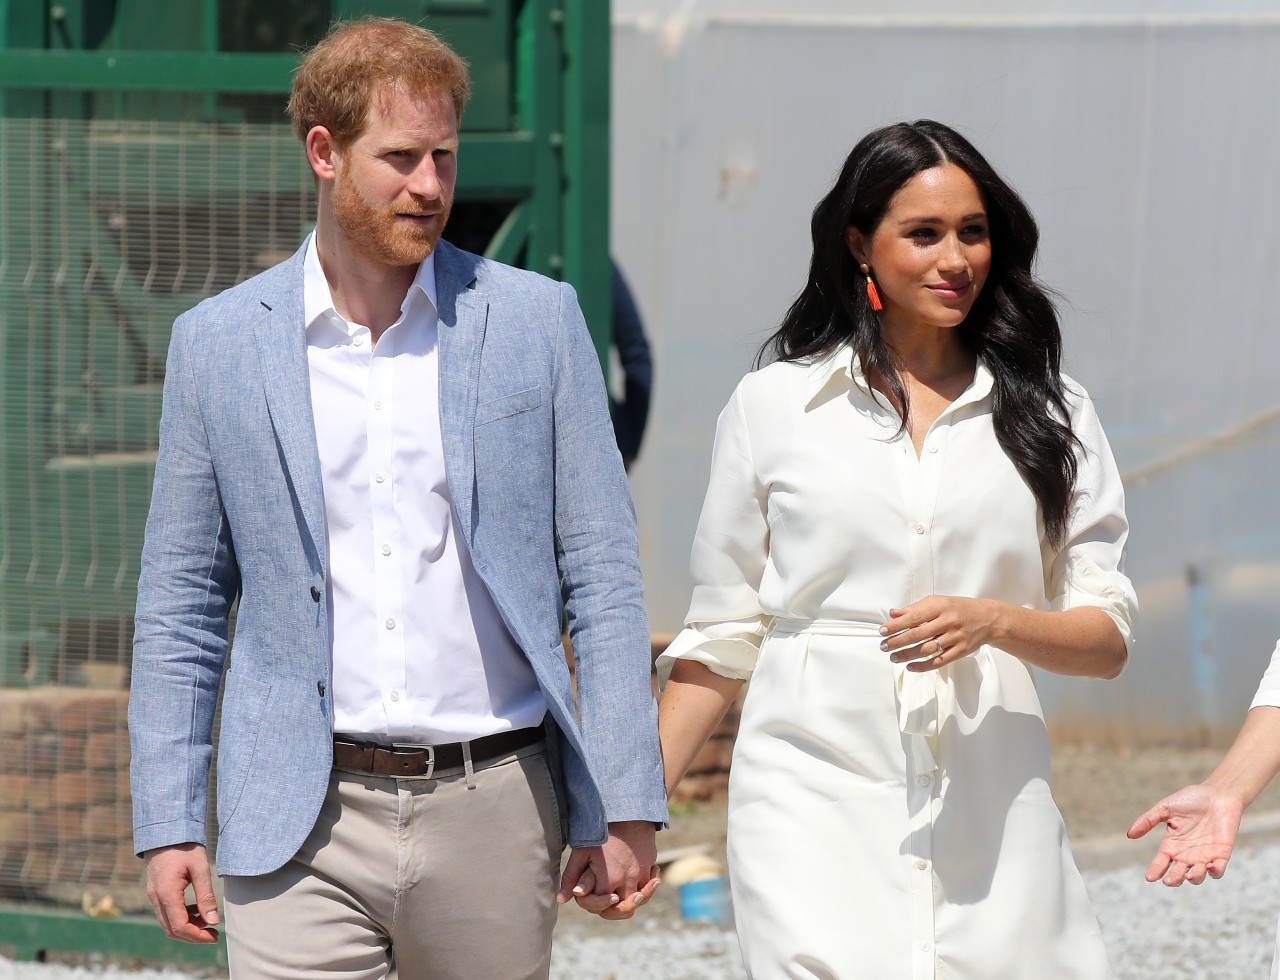 Prince Harry and Meghan Markle walk together in Johannesburg, South Africa.